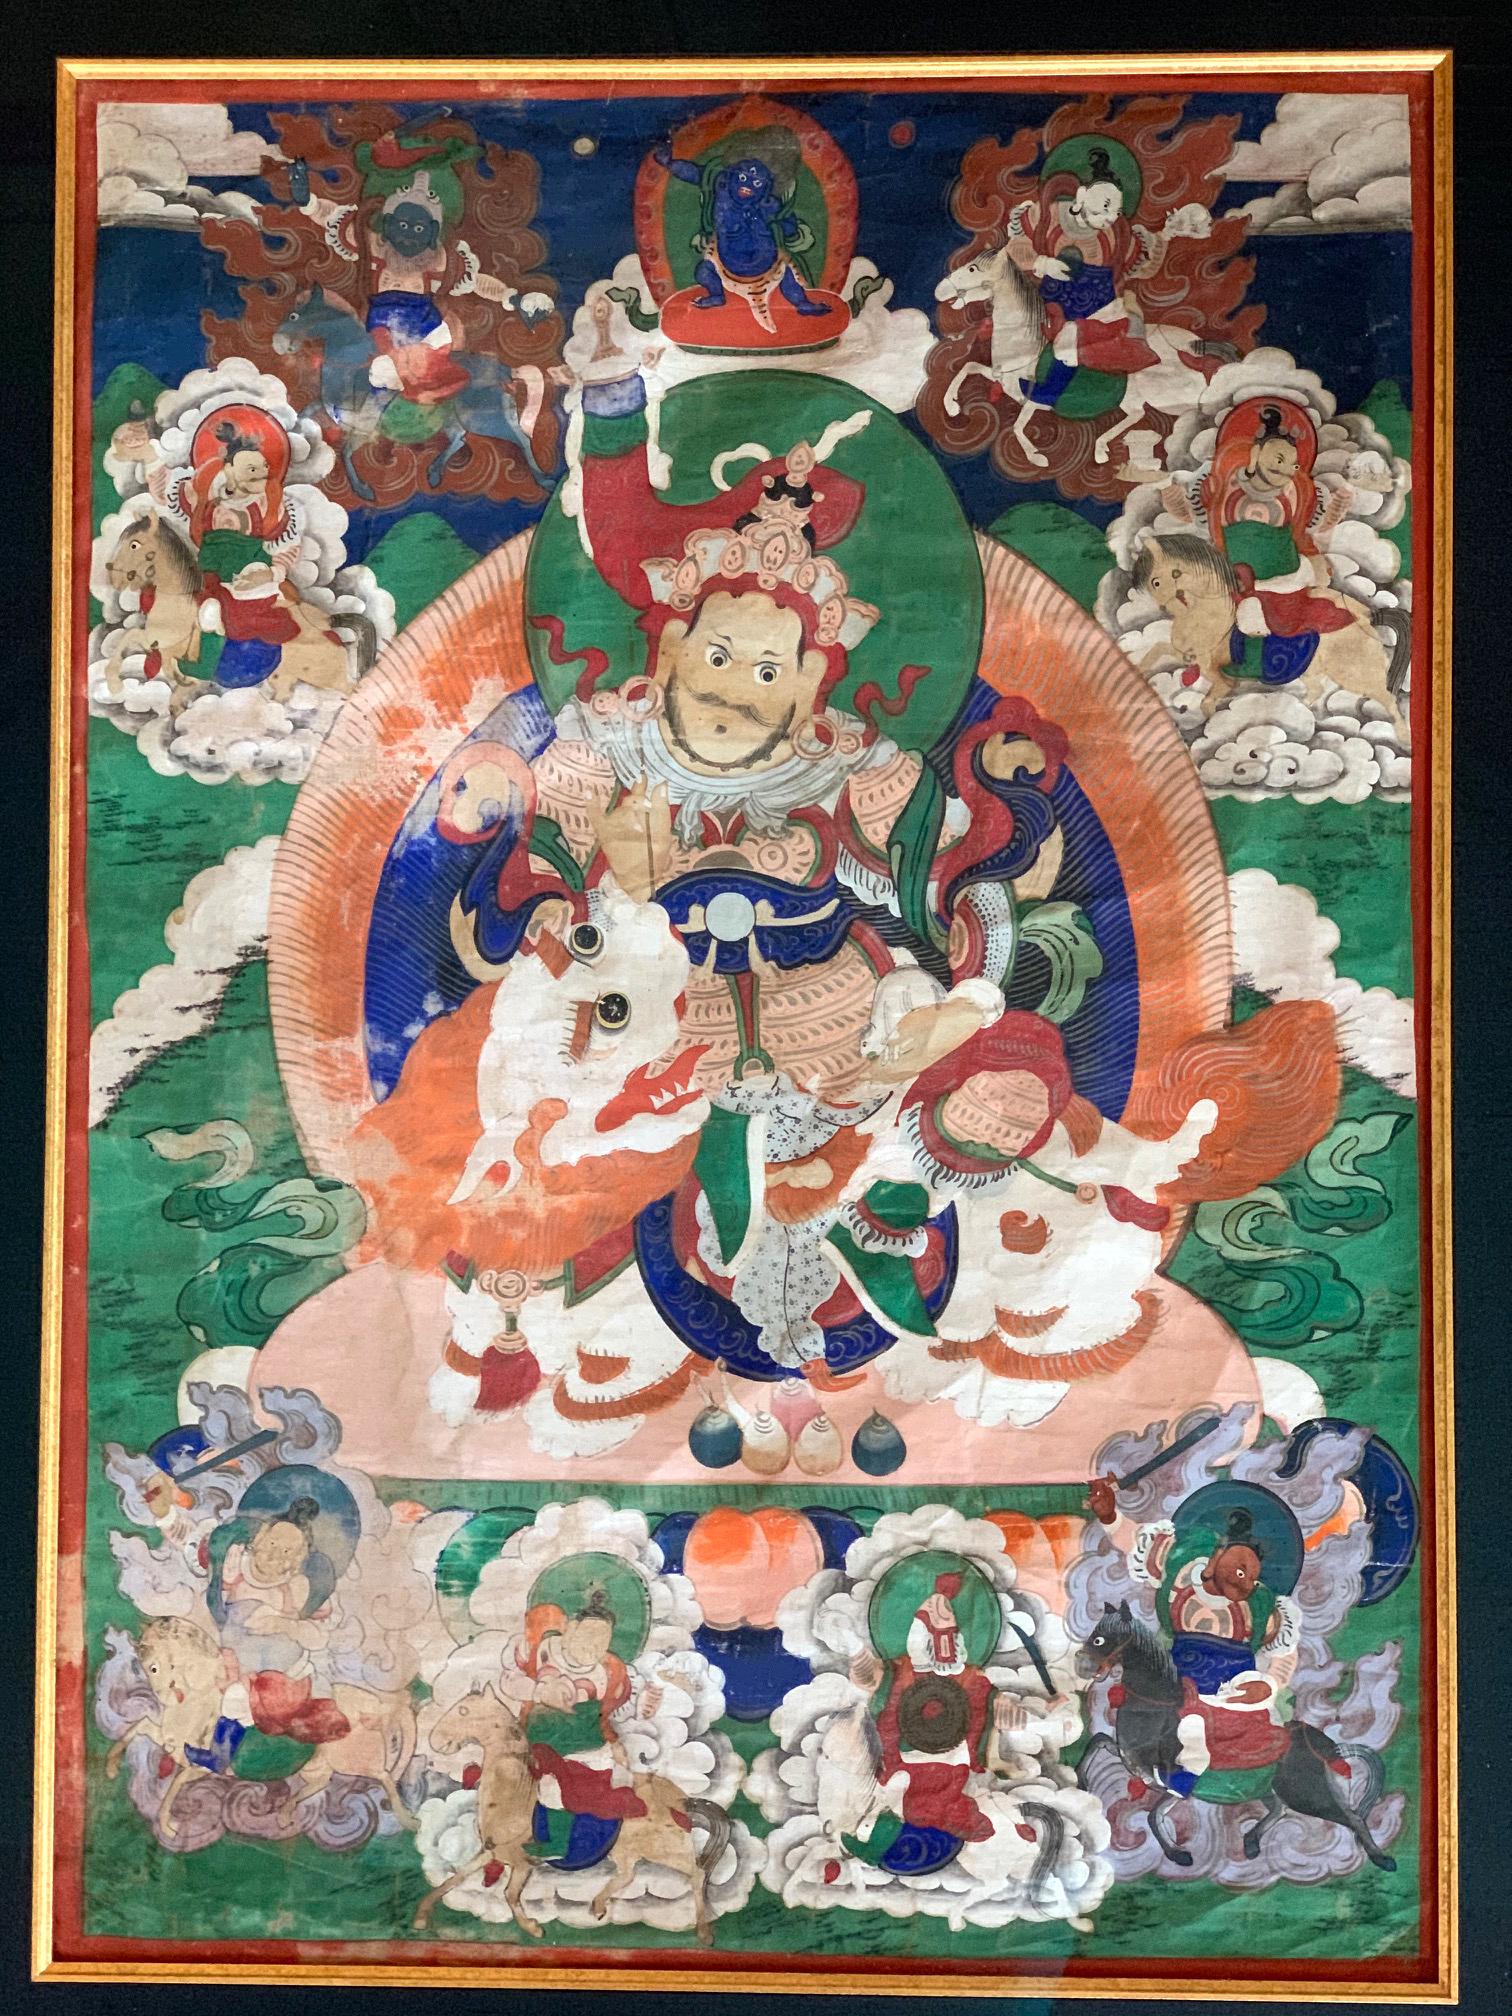 Framed Tibetan painted thangka likely dated to 19th century. The piece depicts a central Lokapala named Vaisravana, one of the four Heavenly Kings. In Tibetan Buddhism, he is also known as Jambhala, or 